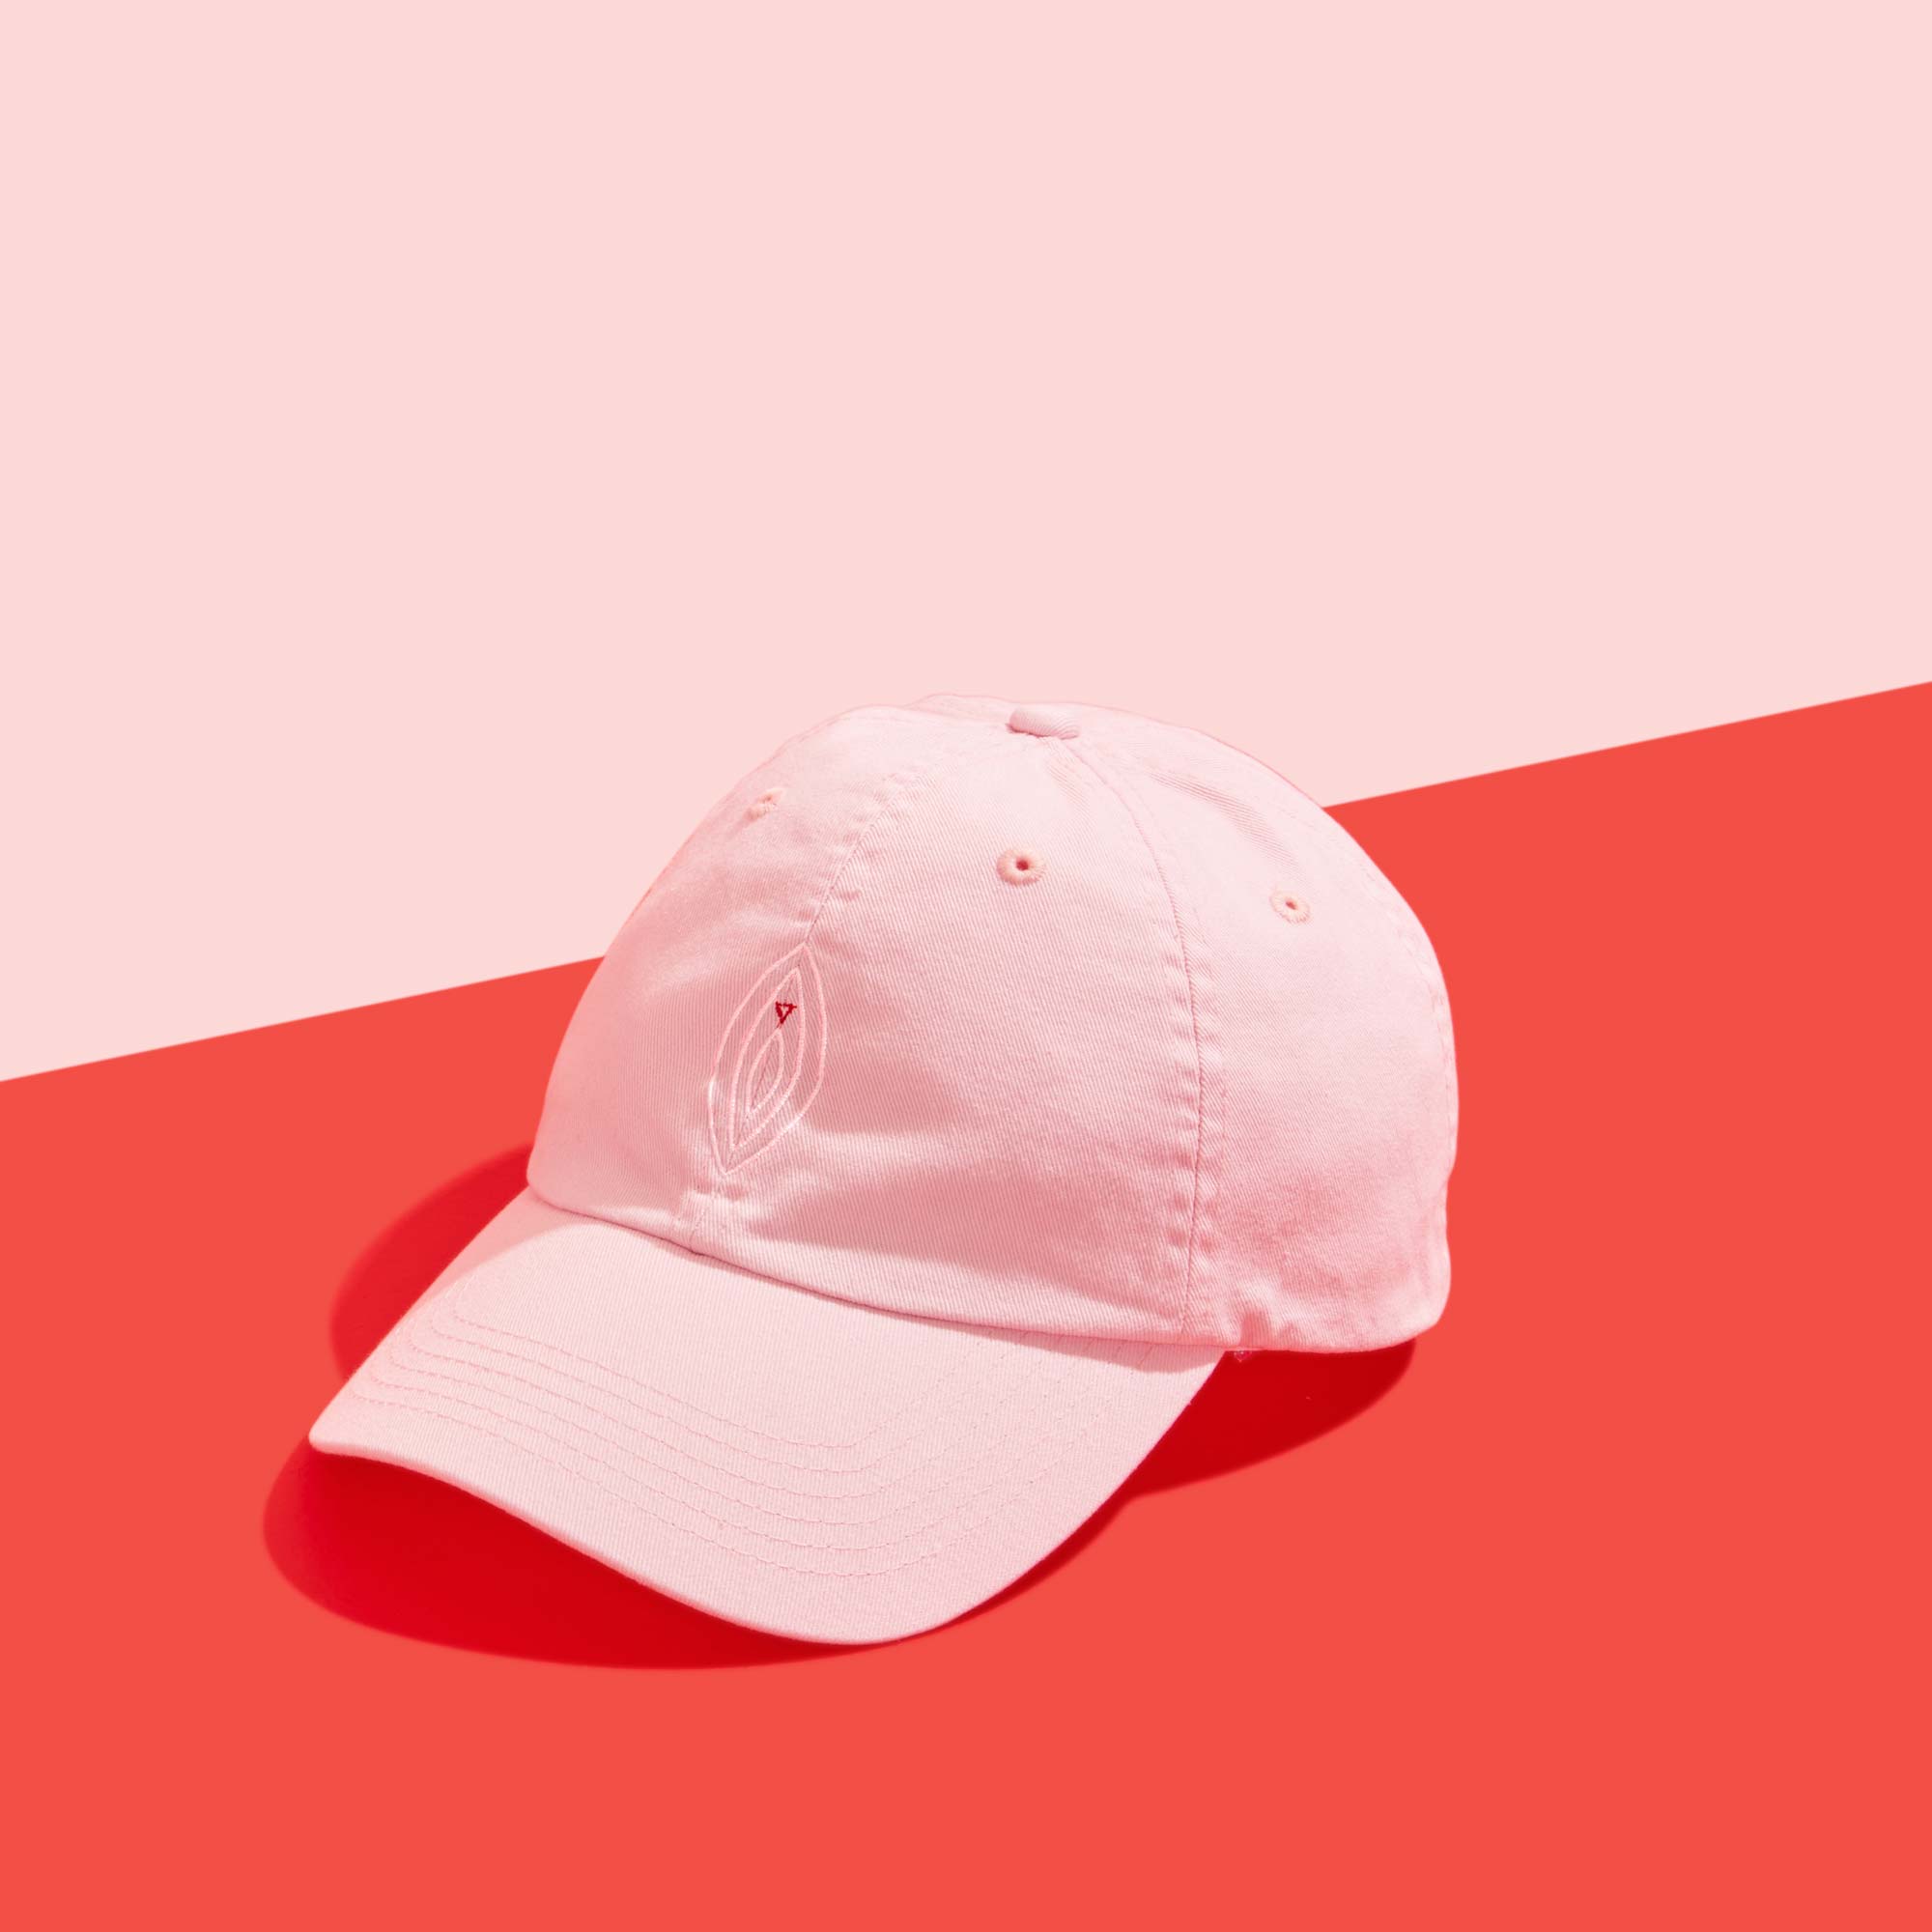 Wisp vulva hat on a pink and red background